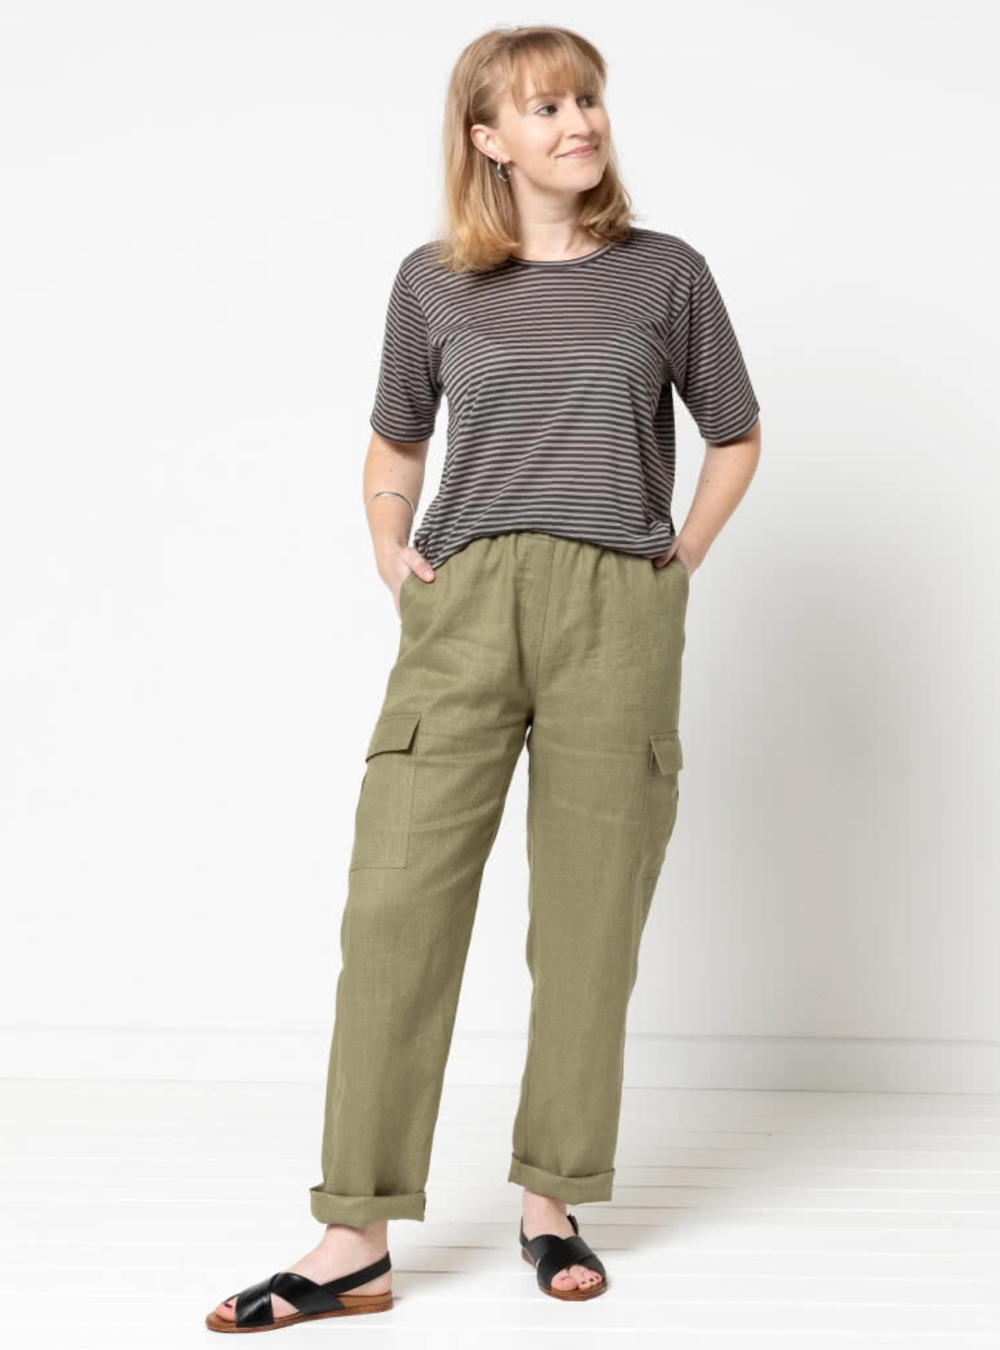 Woman wearing the Delta Cargo Pant sewing pattern from Style Arc on The Fold Line. A cargo trouser pattern made in drill, denim, light wool or washed linen fabrics, featuring a straight leg, elastic waist, faux fly, front slant pockets, back patch pockets